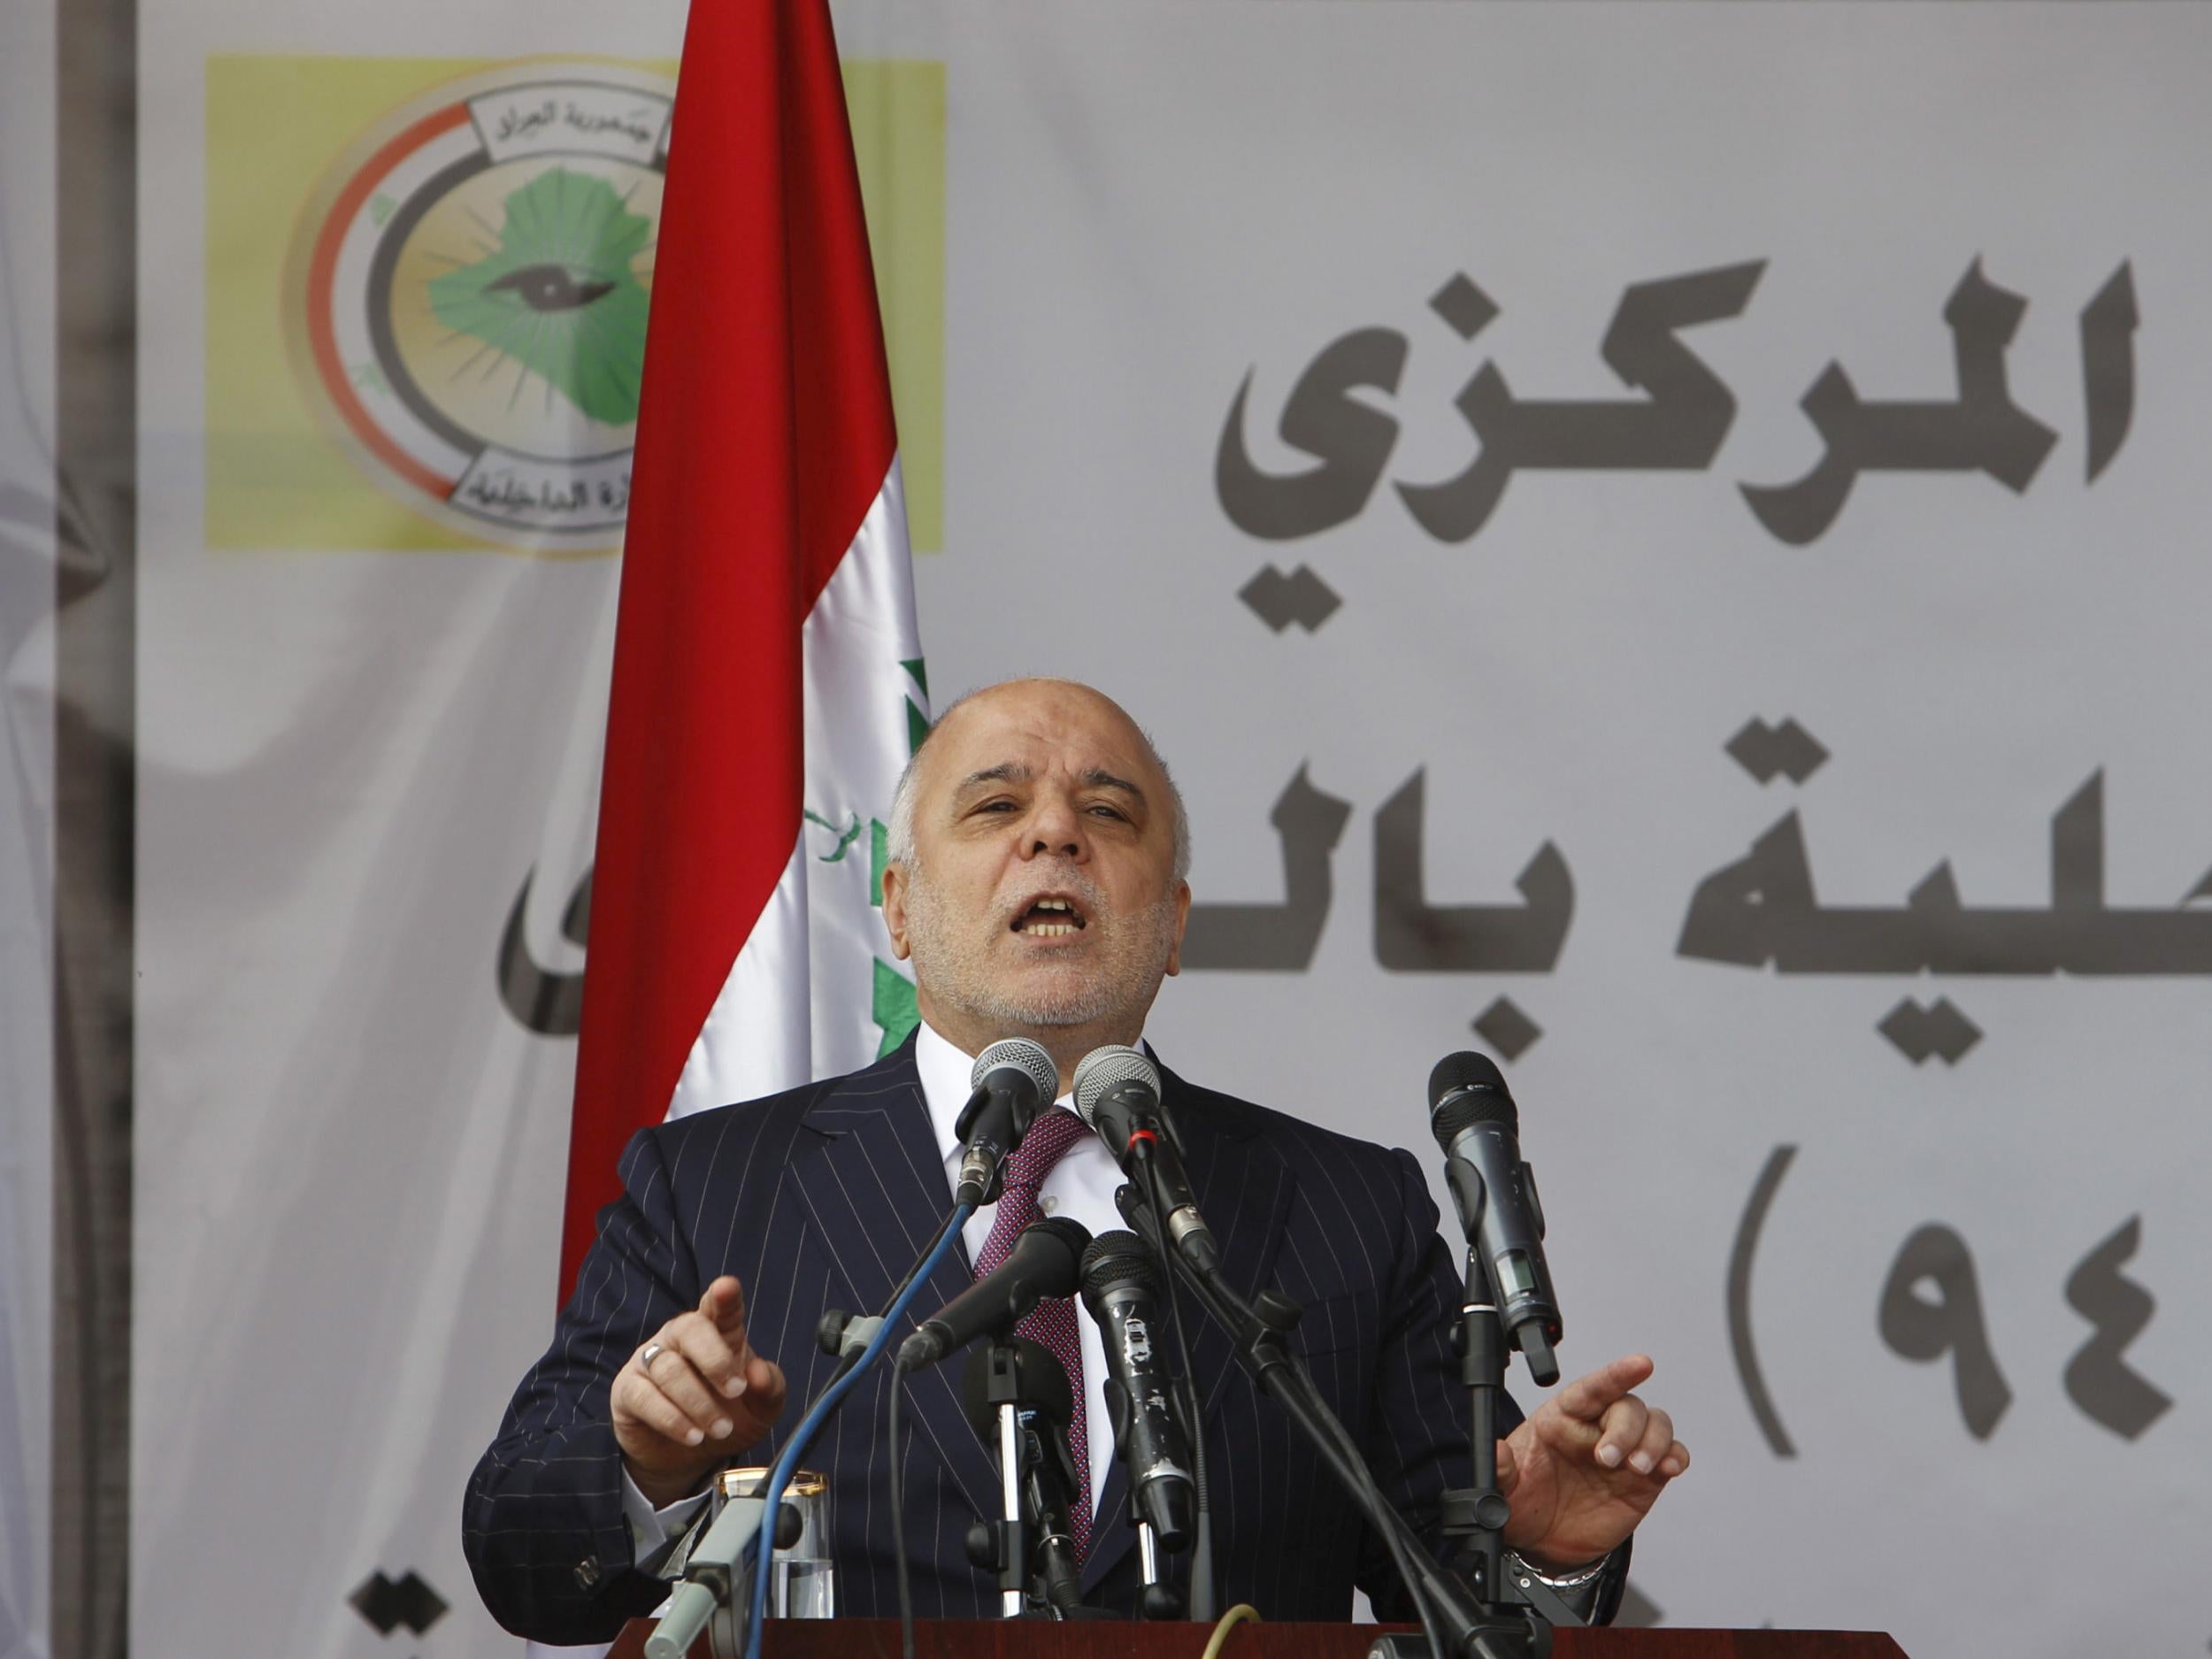 Prime Minister Haider al-Abadi has come under increasing in recent months following political instability and the cost of the fight against Isis